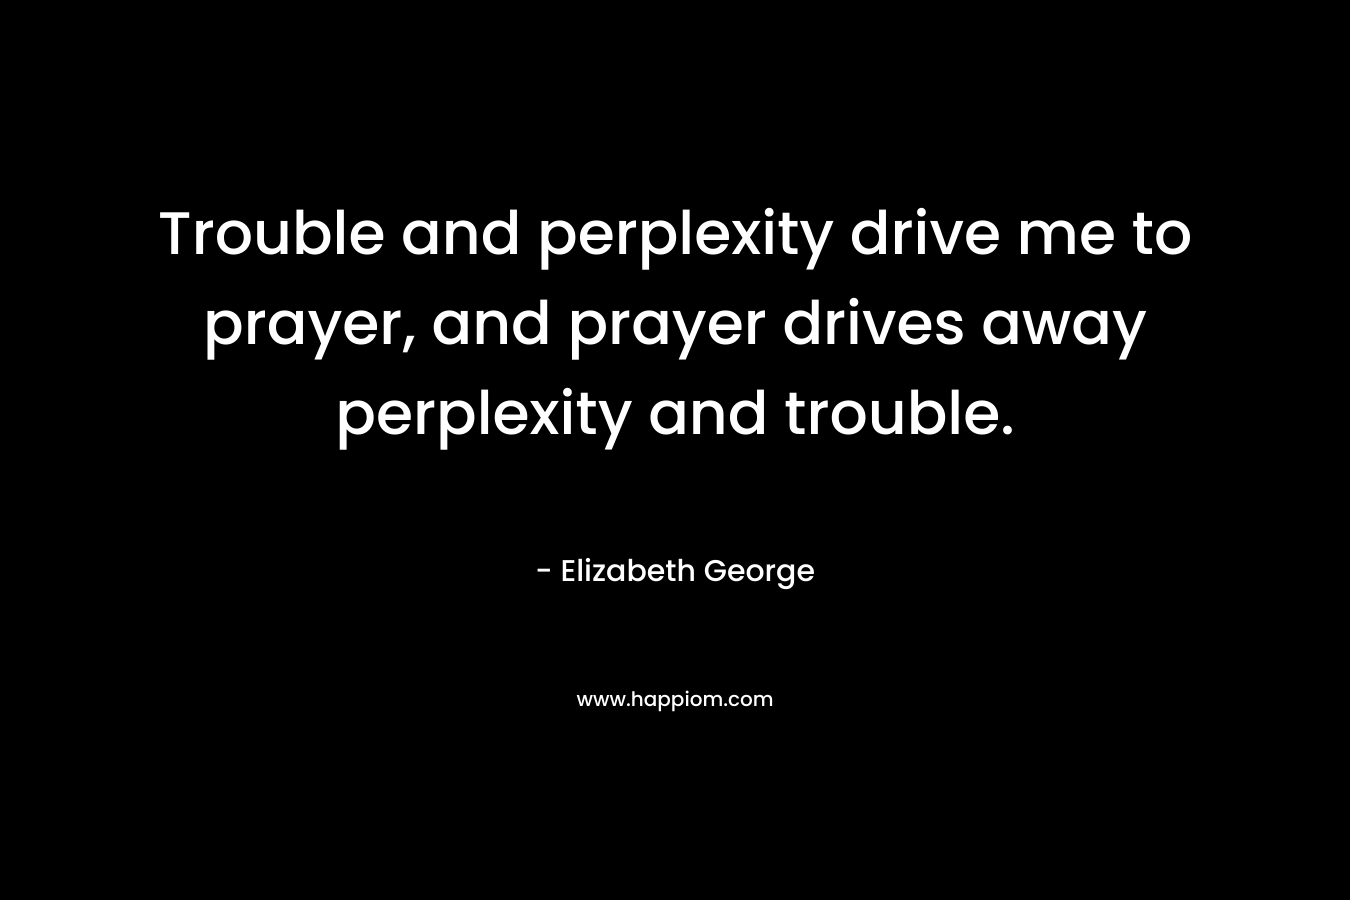 Trouble and perplexity drive me to prayer, and prayer drives away perplexity and trouble. – Elizabeth George